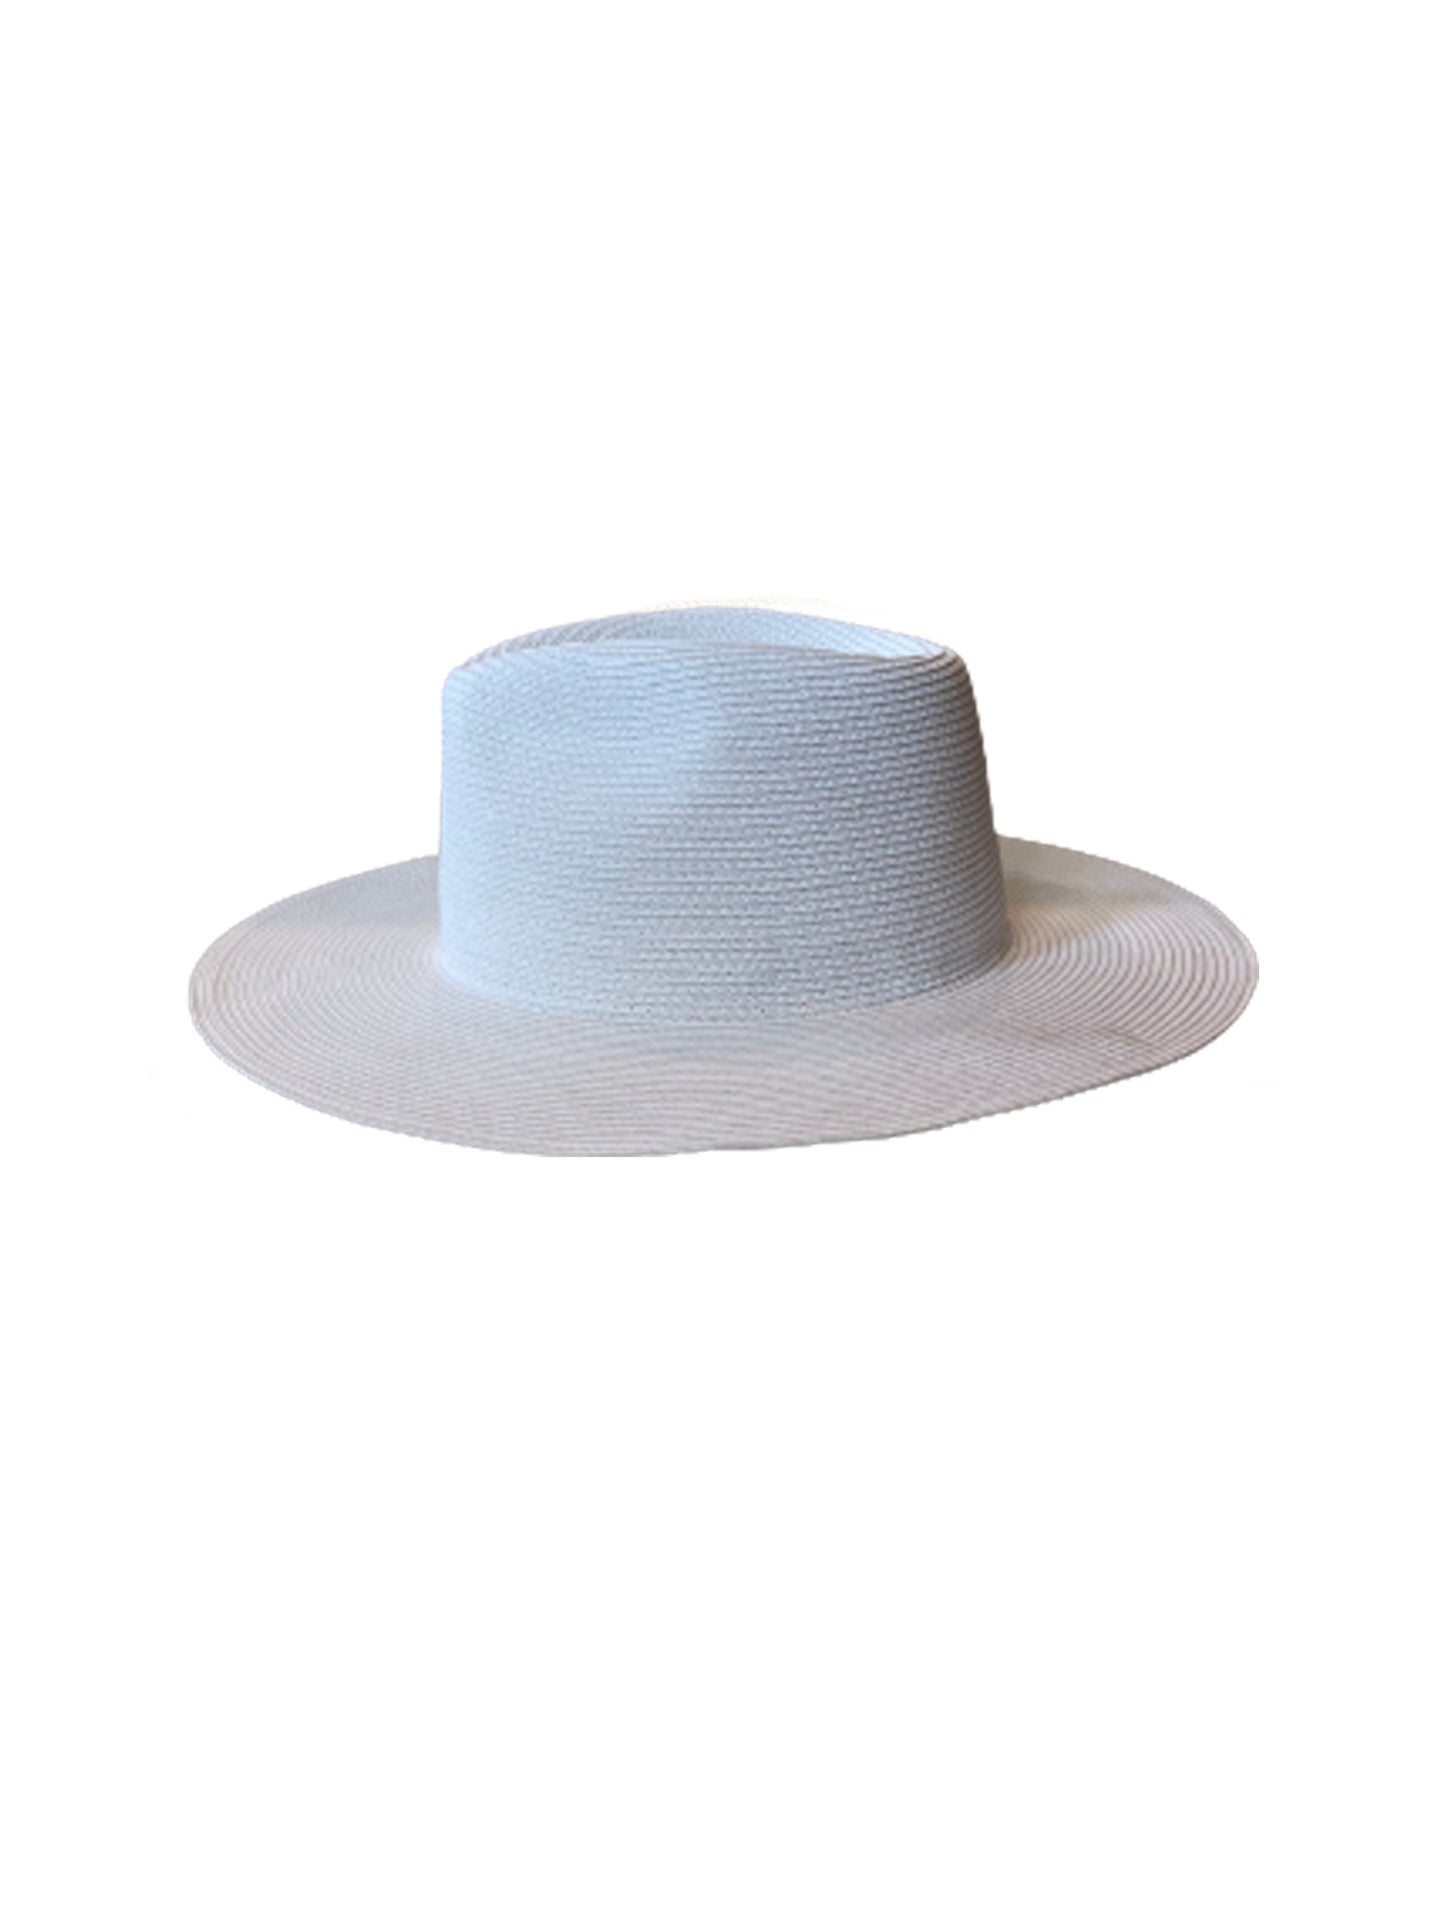 the native hat white side